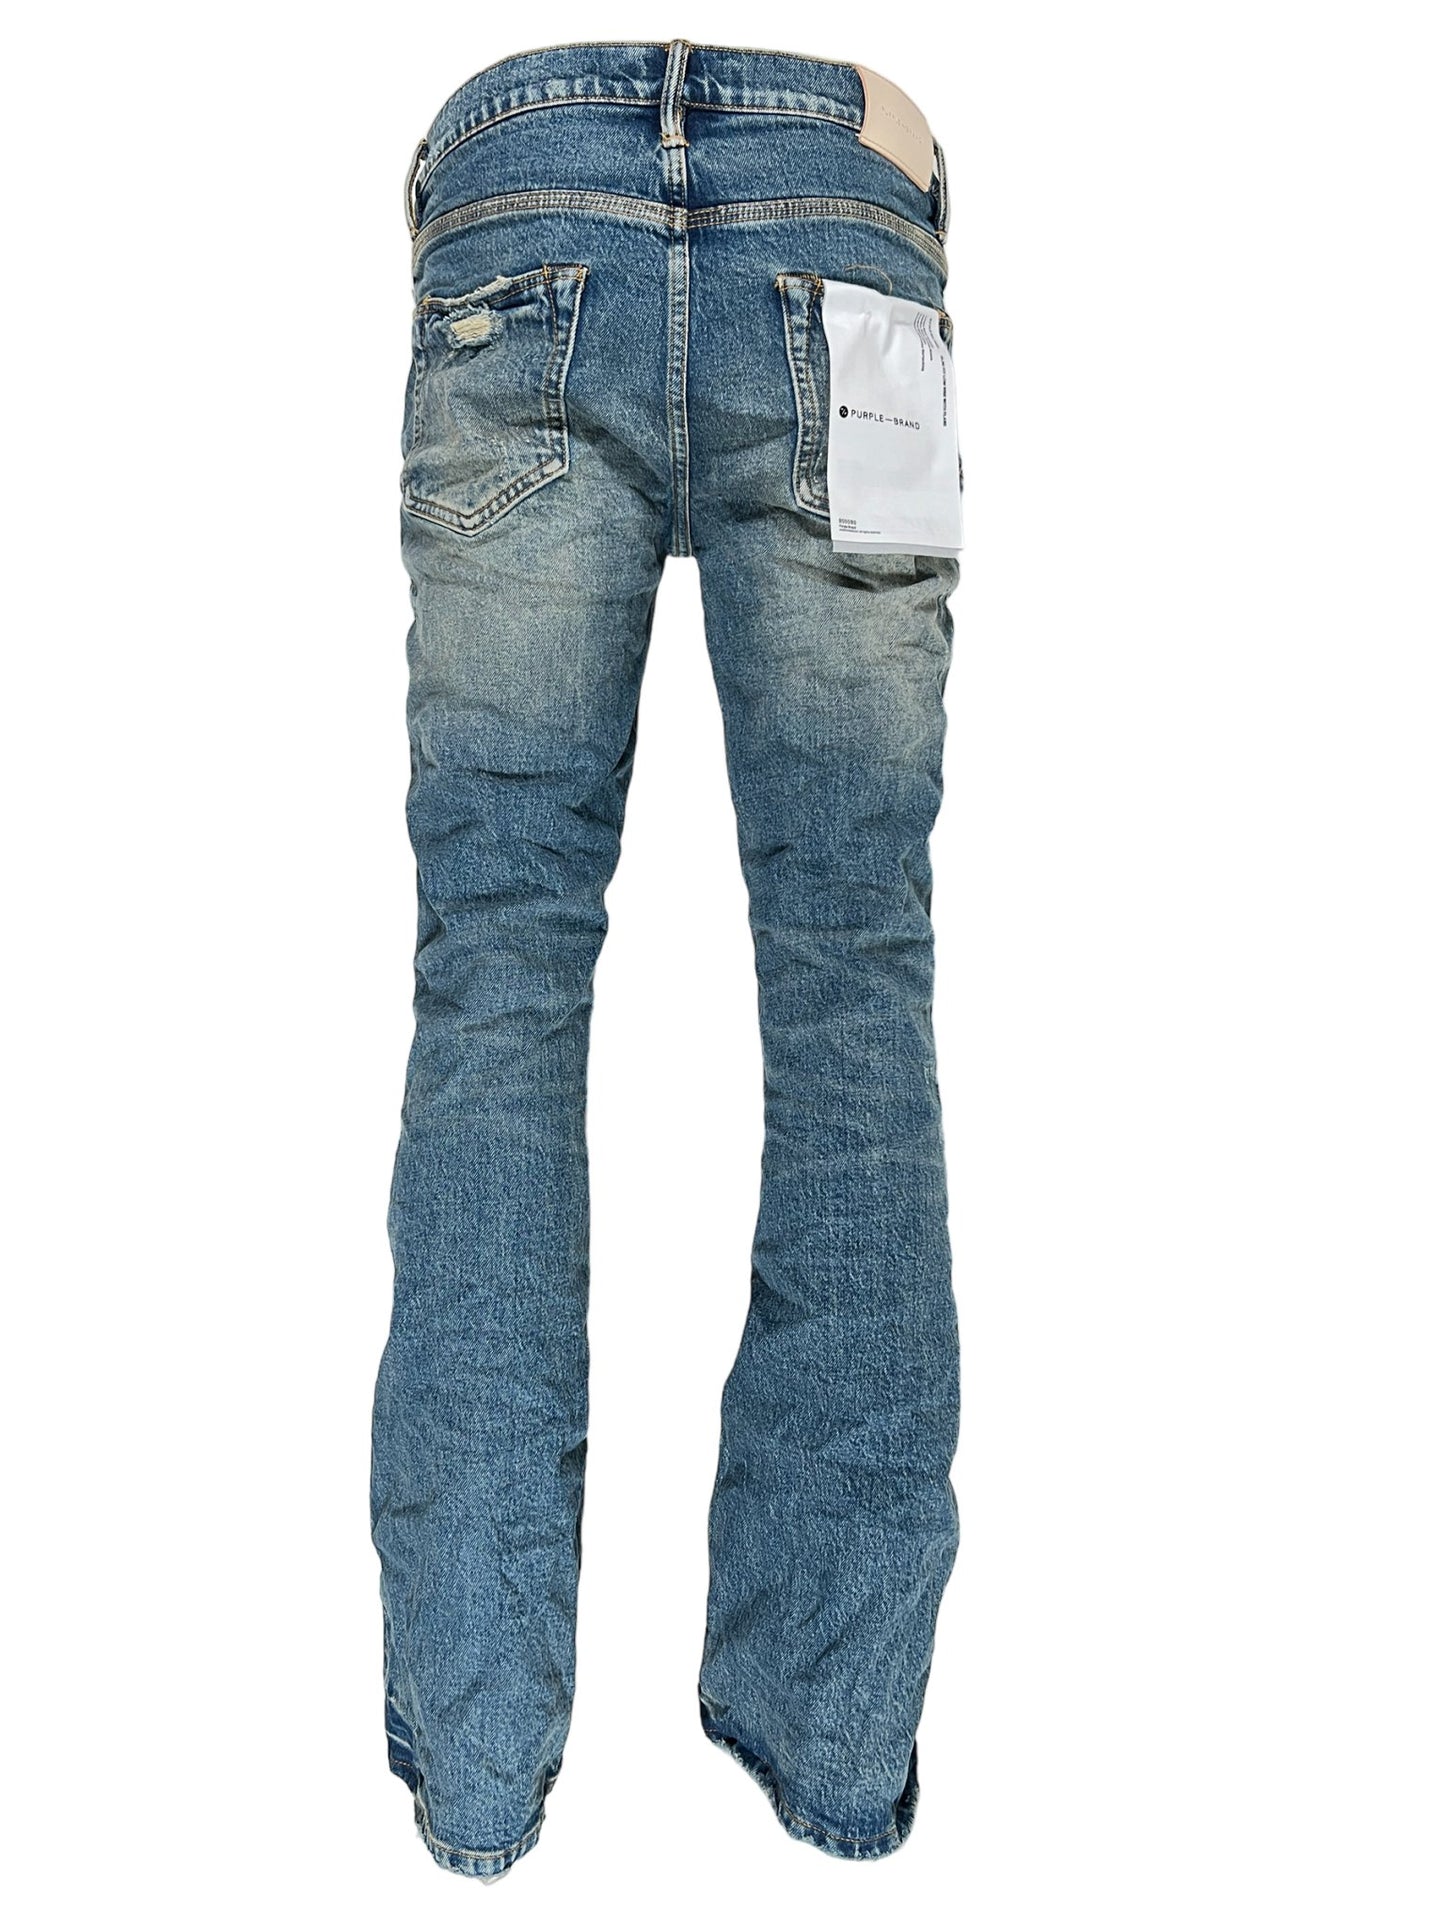 A pair of Purple Brand P004-PRFL Patch Repair Flare Mid Indigo stretch denim jeans with a pocket on the back.